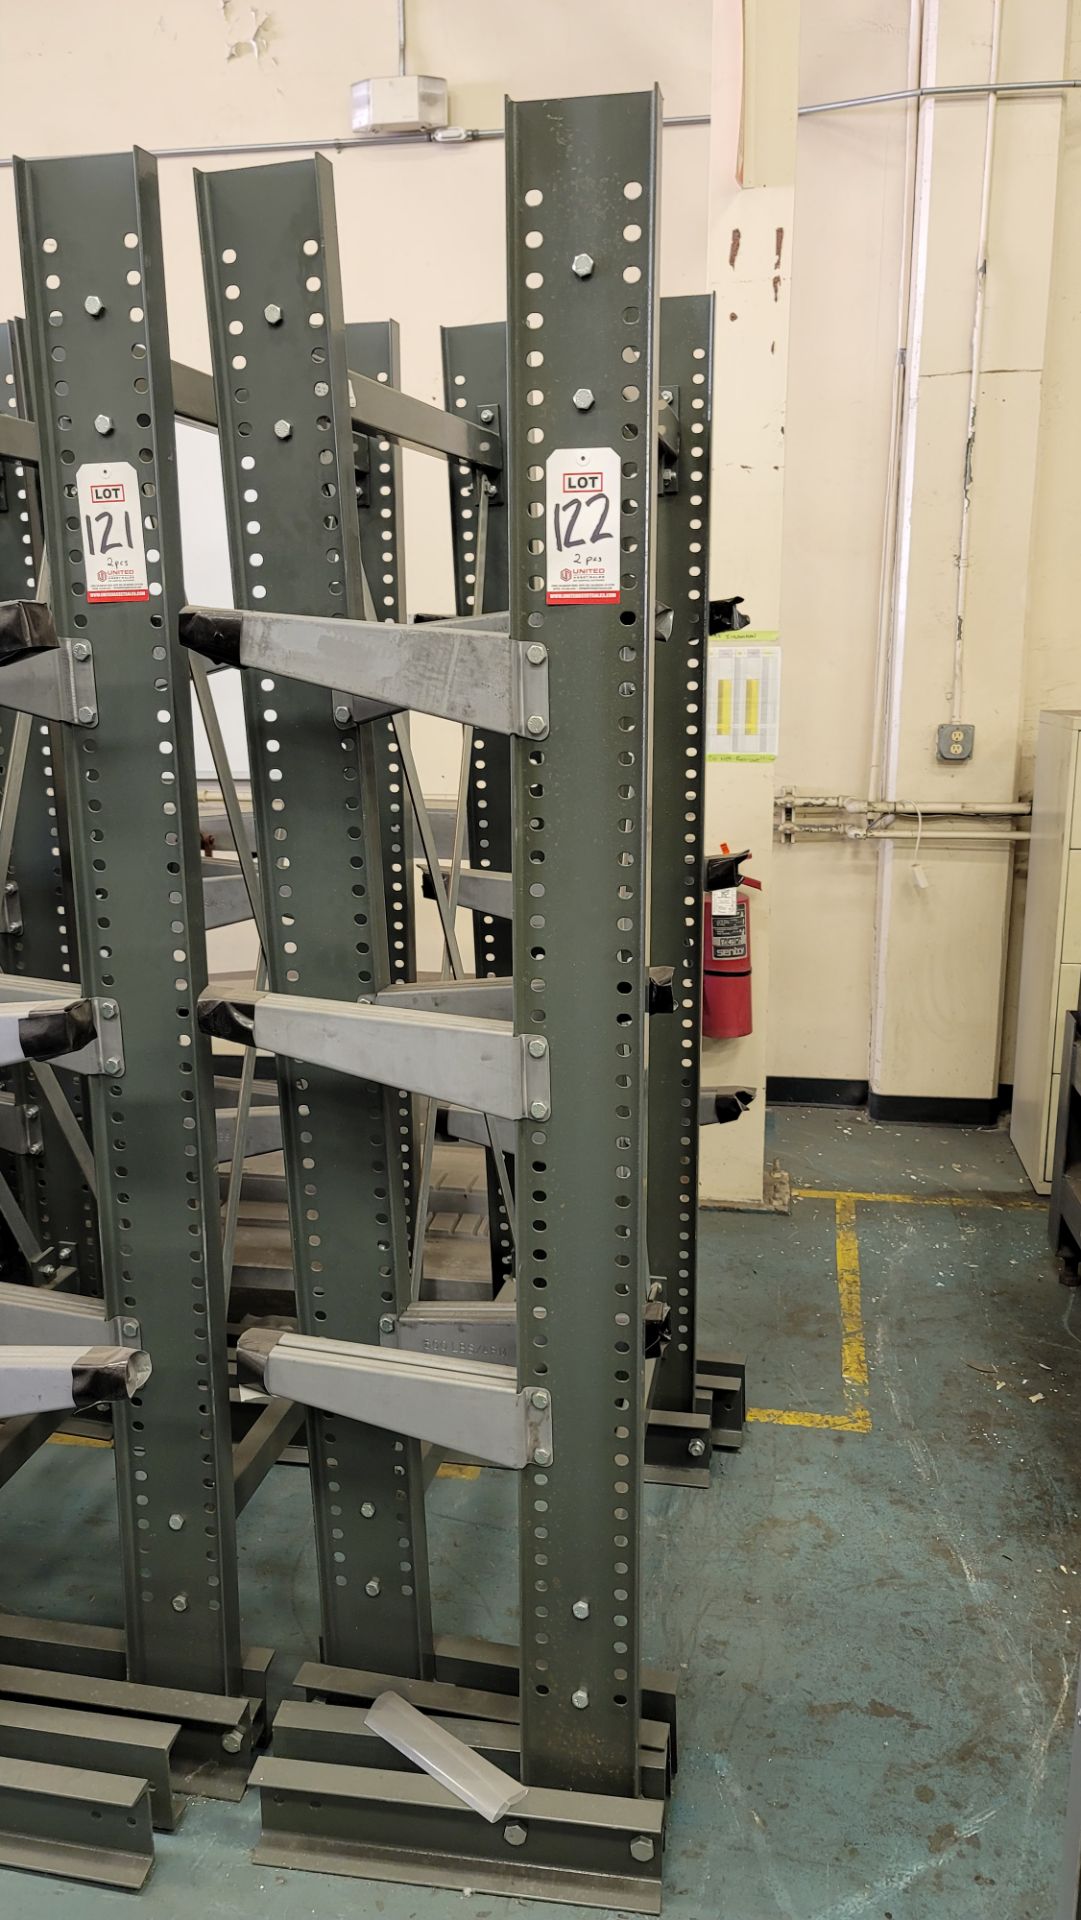 LOT - (2) 3' SECTIONS OF CANTILEVER MATERIAL RACKS, W/ 14" ARMS, 500 LB CAPACITY PER ARM, 84" HT (